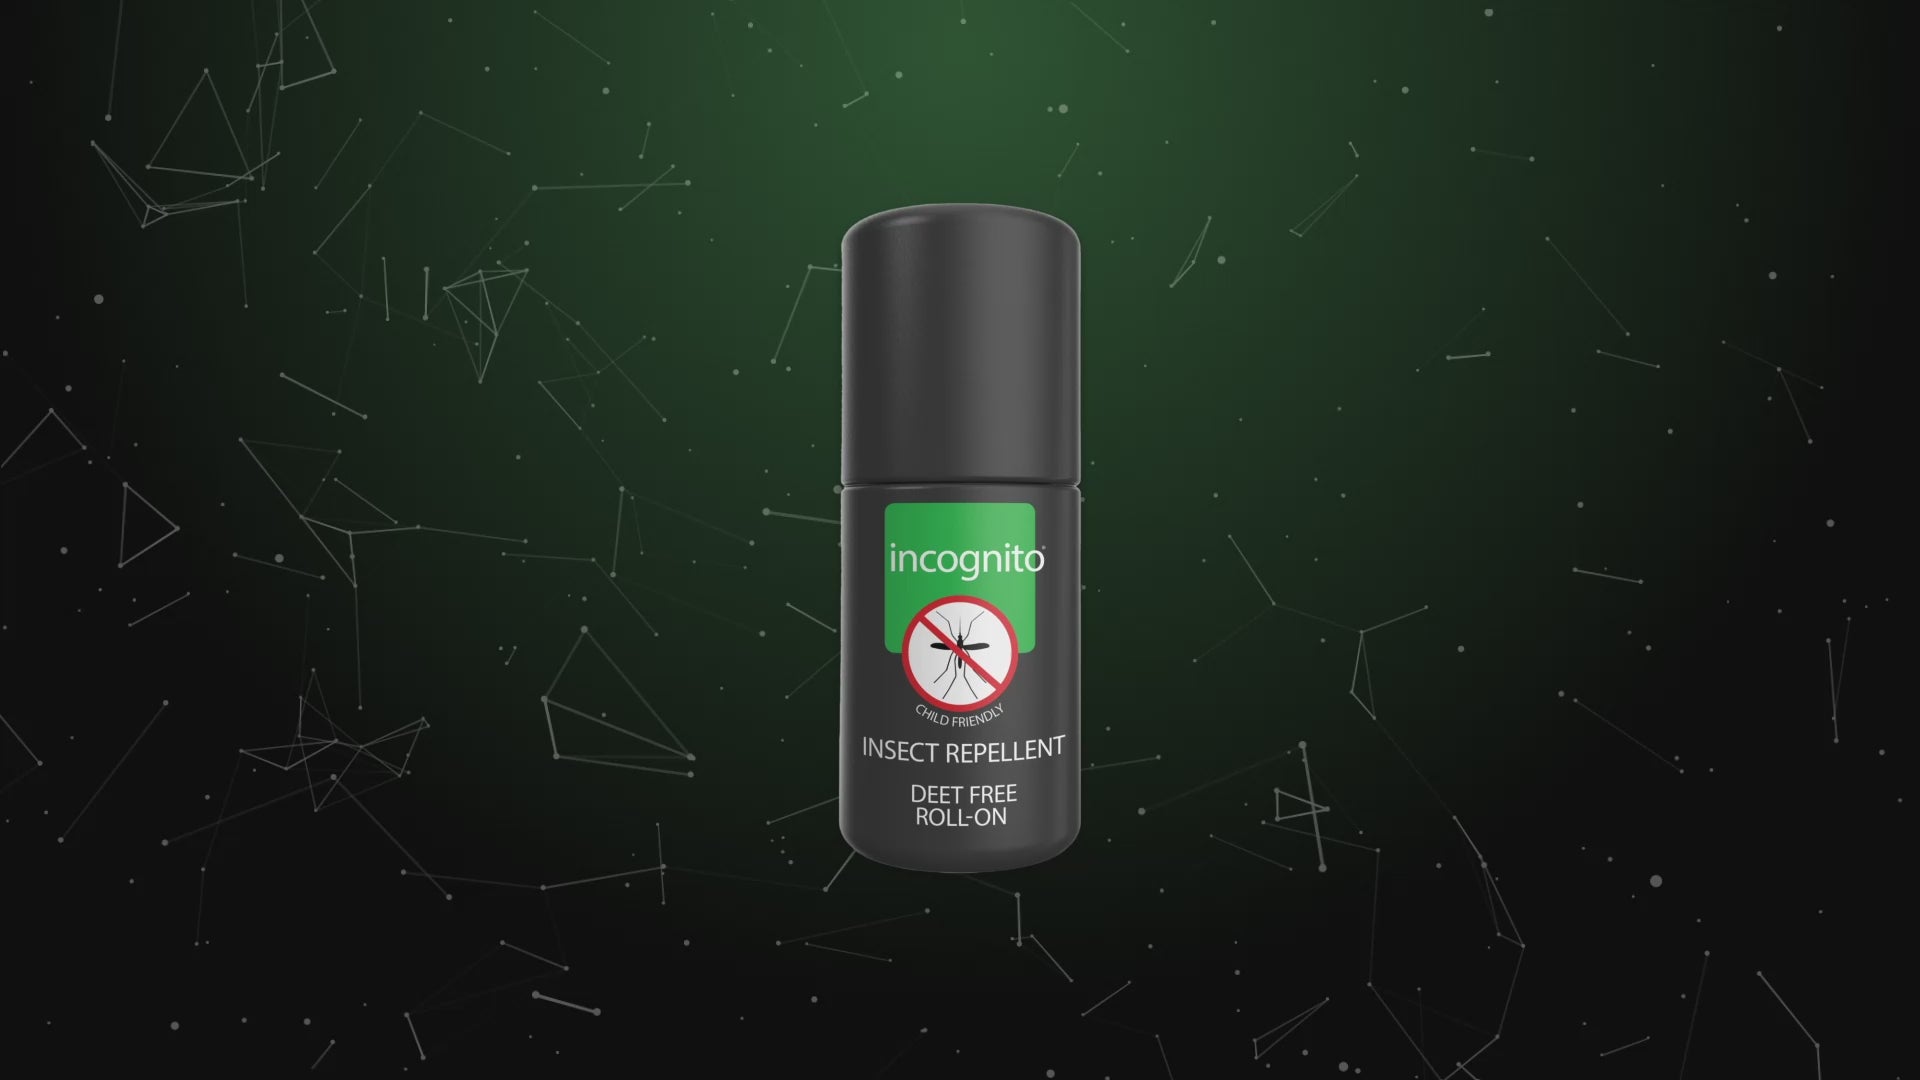 Incognito Roll-On Insect Repellent 50ml - Video